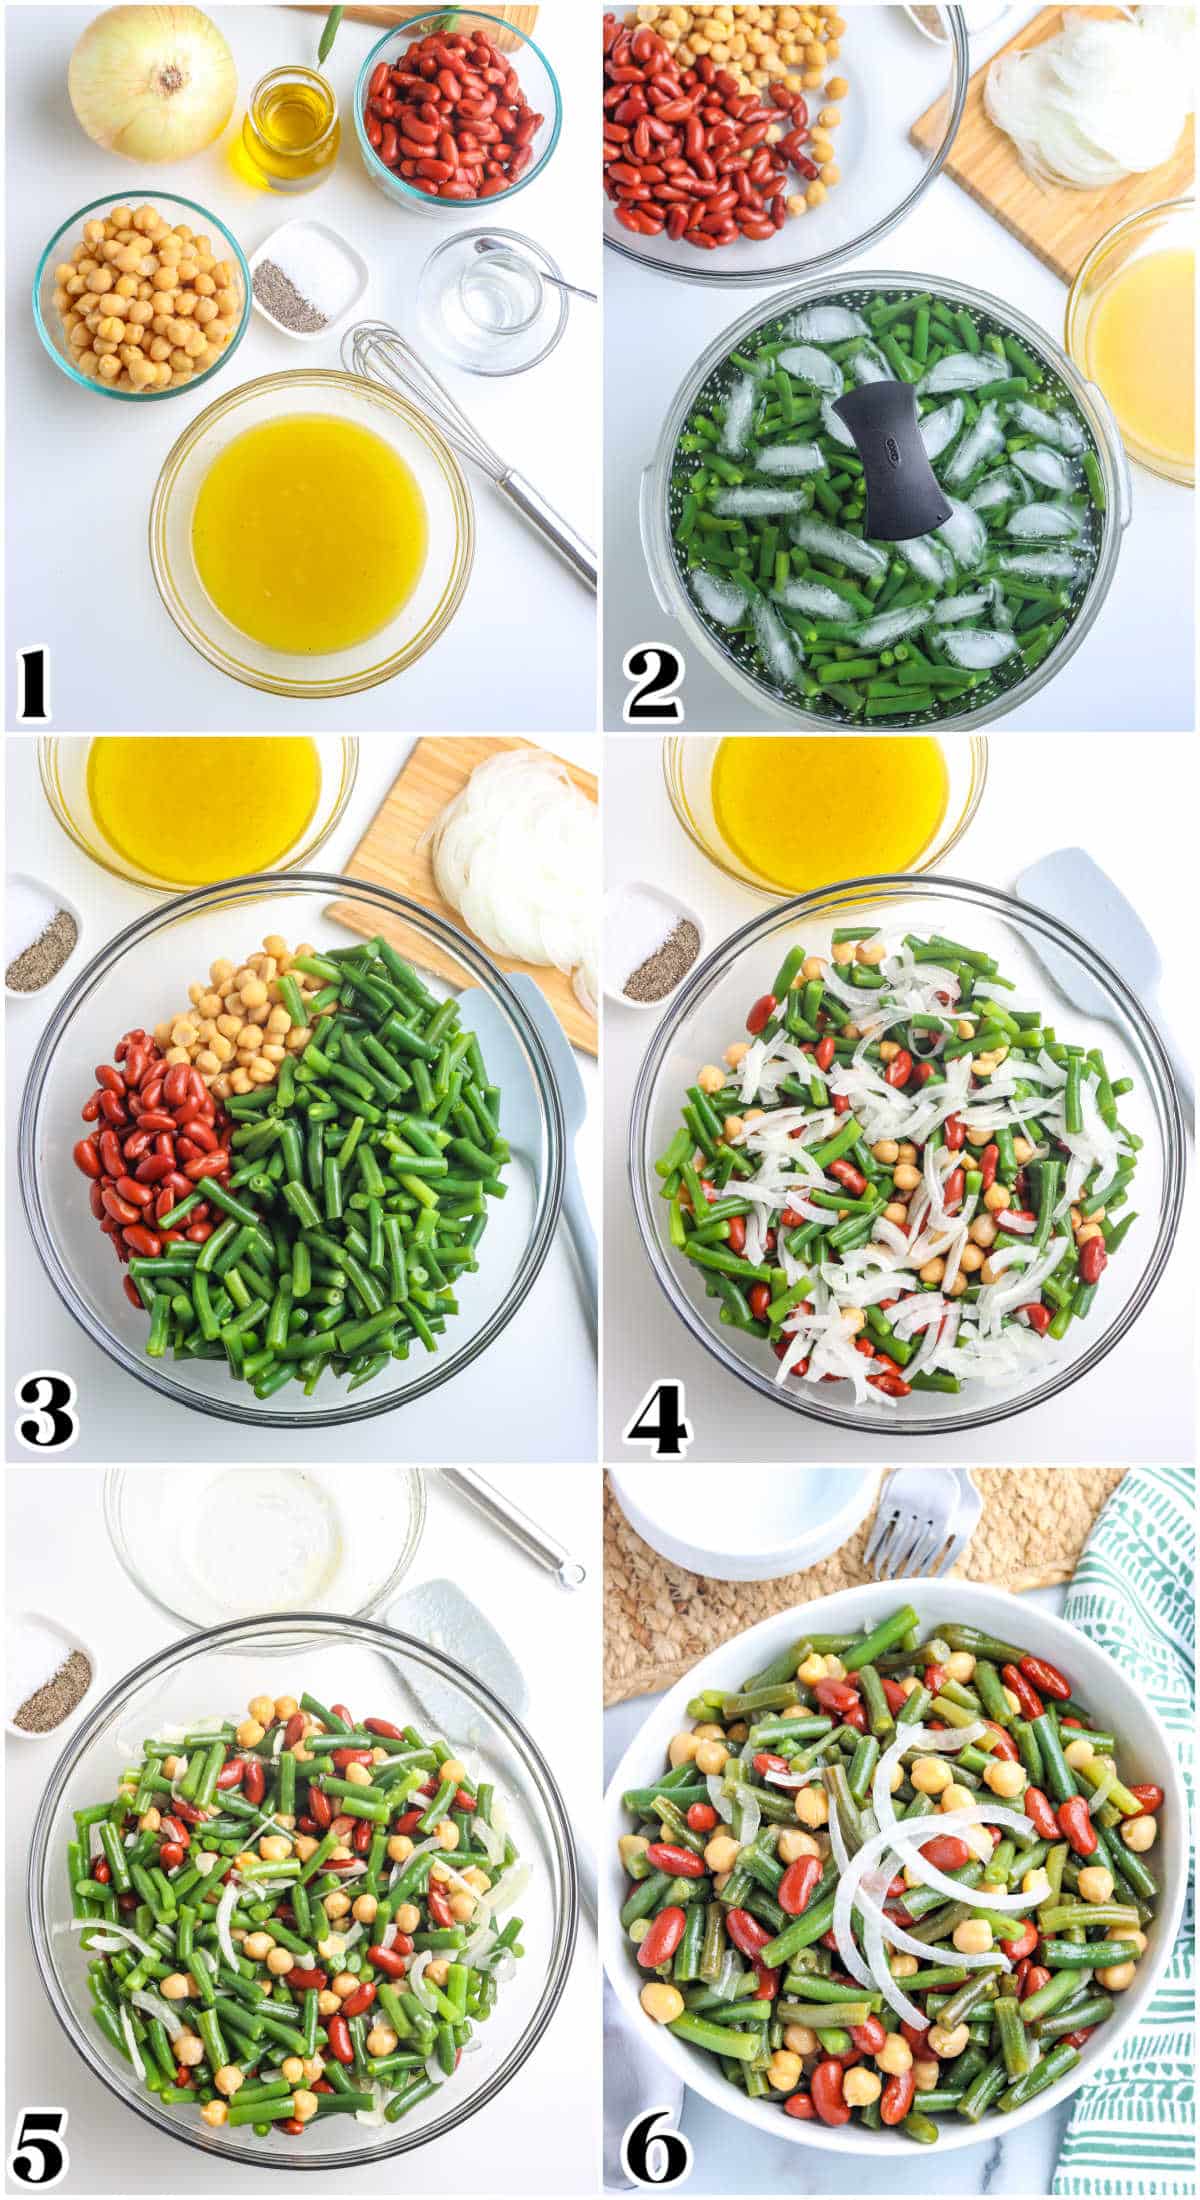 A picture collage showing the steps of how to make three bean salad from making the dressing to tossing and chilling the salad overnight.